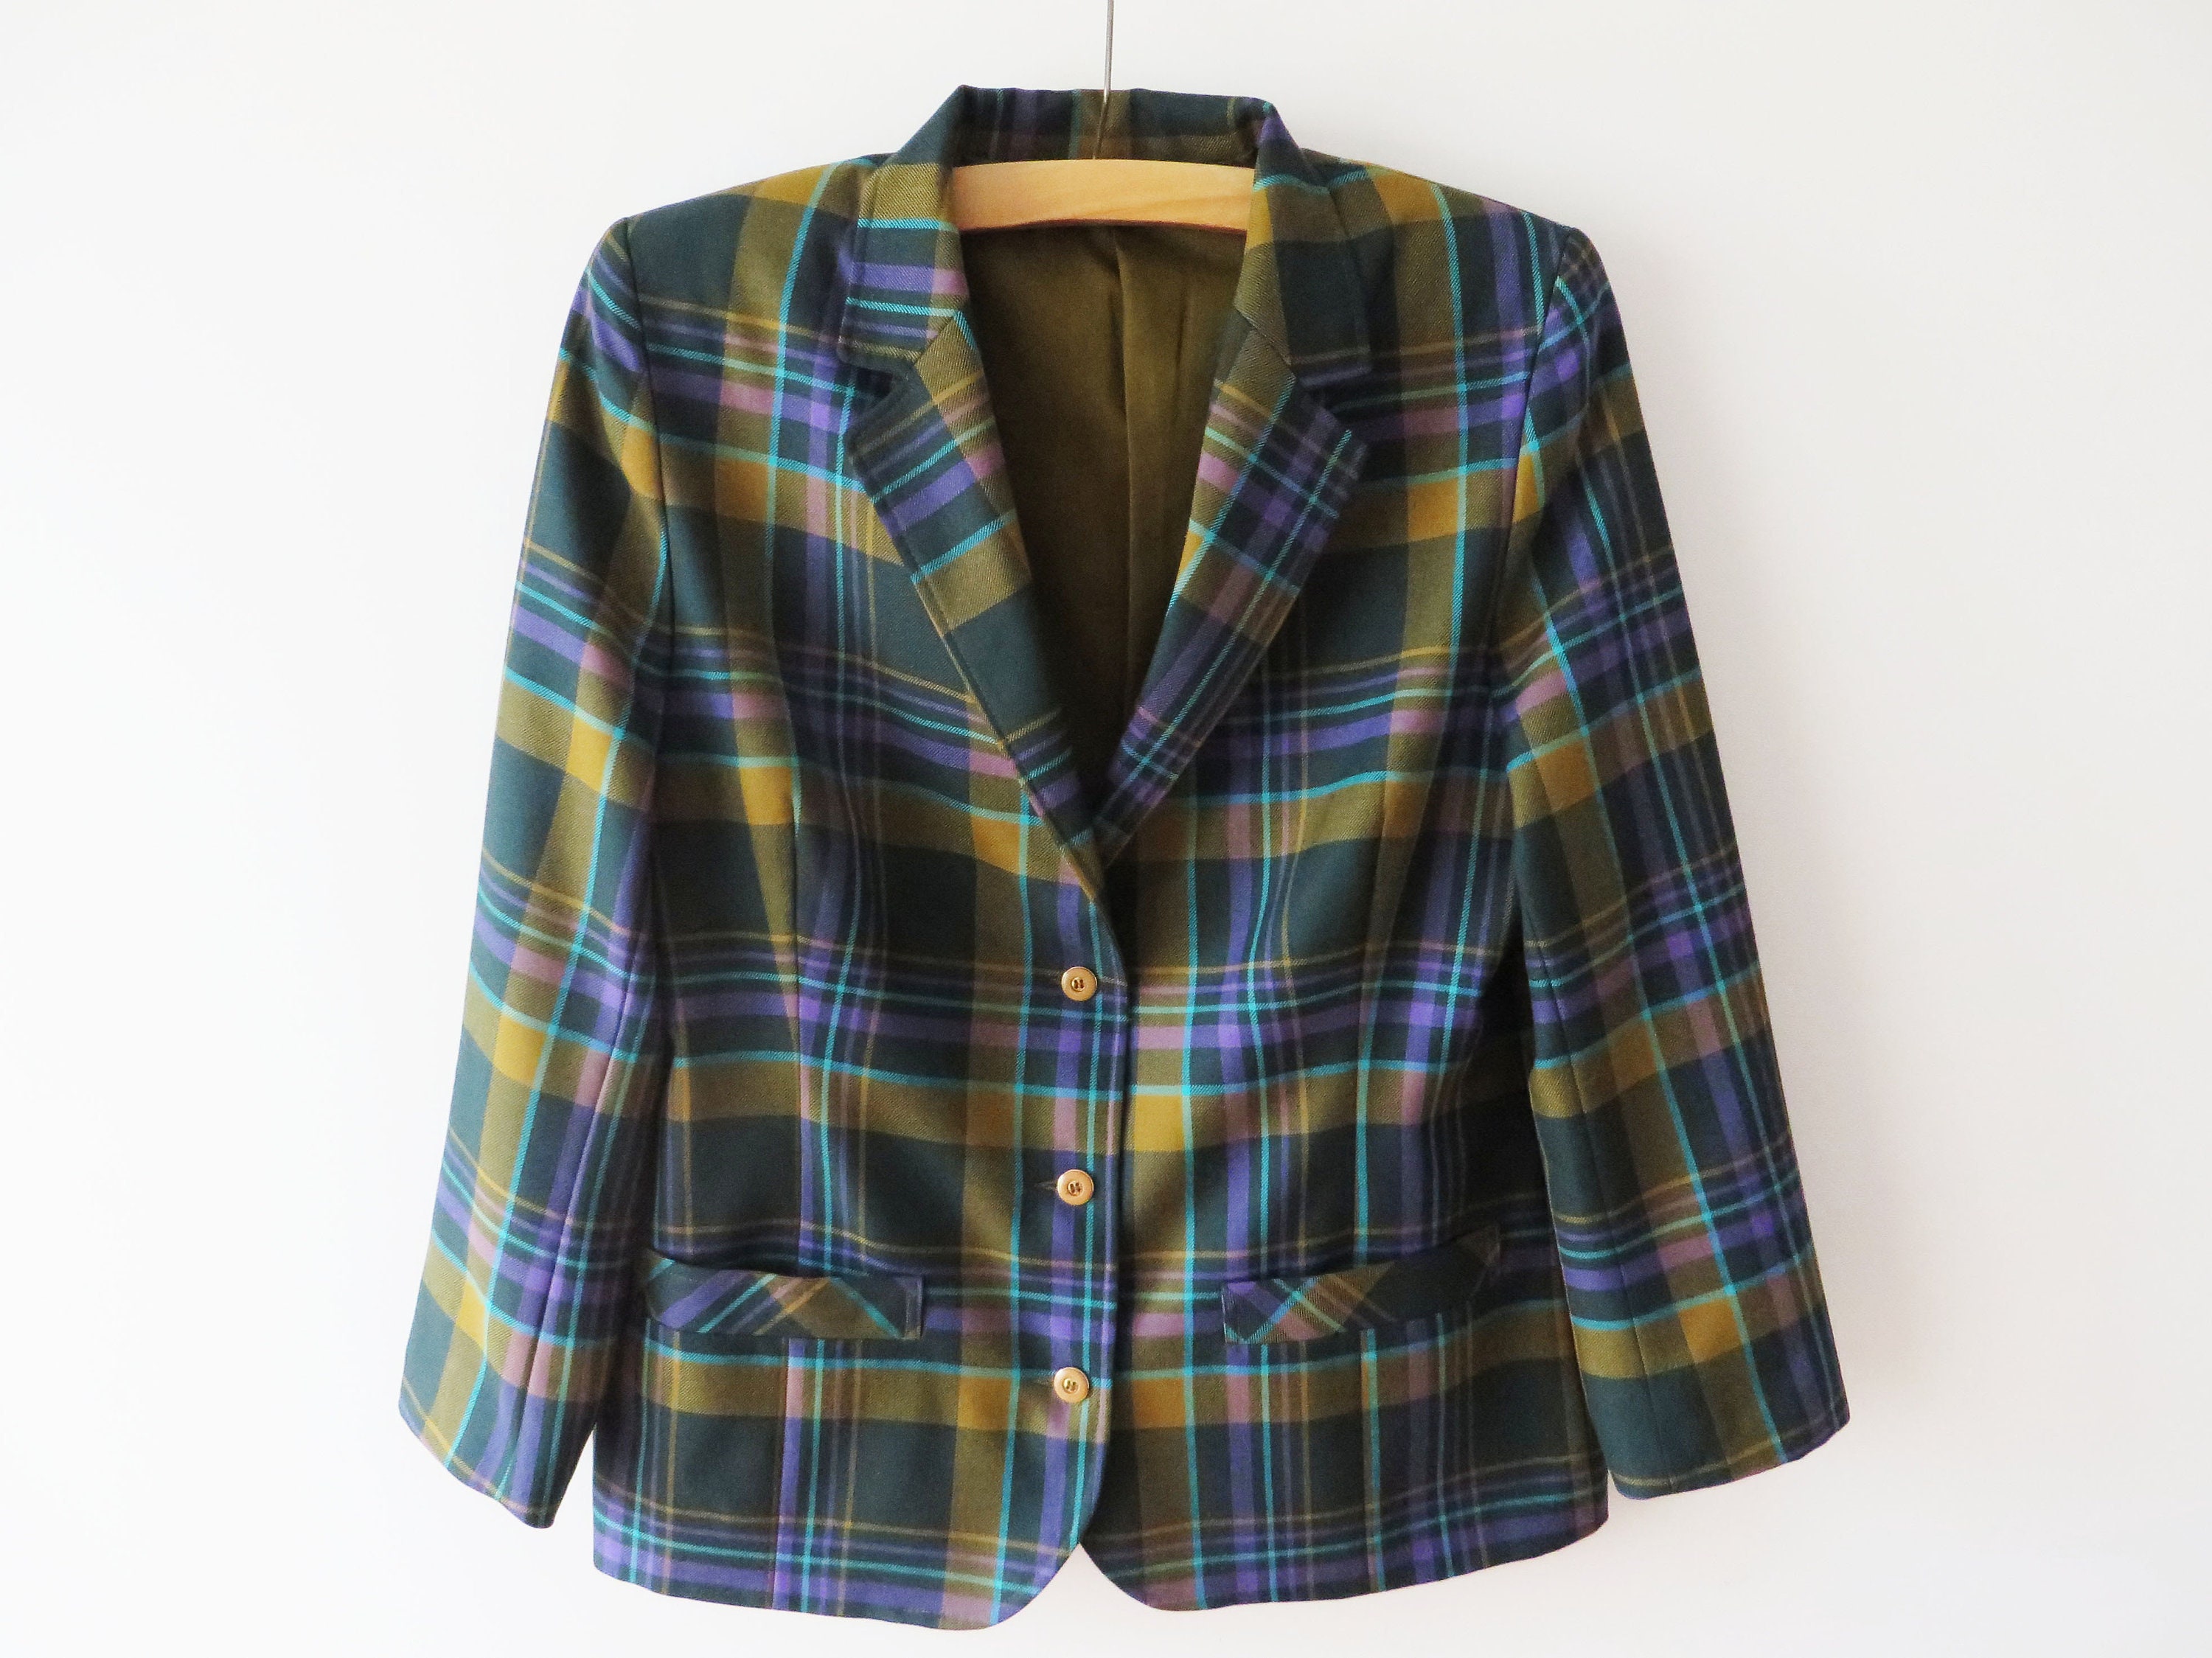 90S Plaid Women Blazer Wool Blend Formal Jacket With Pockets Lined Checkered Office Wear Gift For Her Size Medium To Large